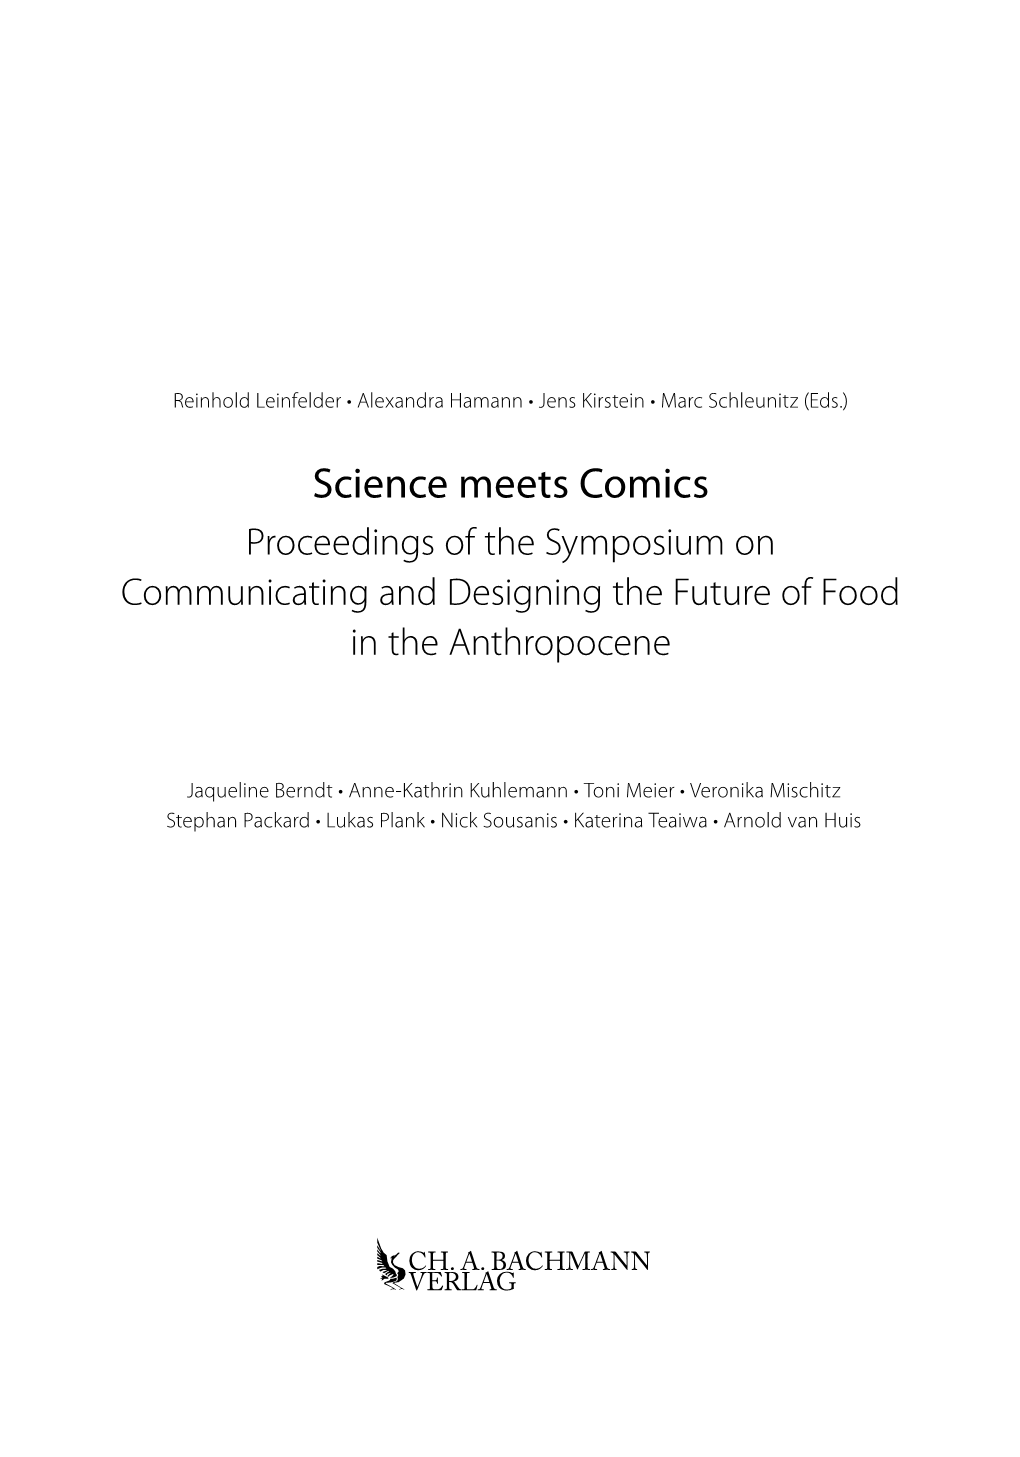 Science Meets Comics Proceedings of the Symposium on Communicating and Designing the Future of Food in the Anthropocene